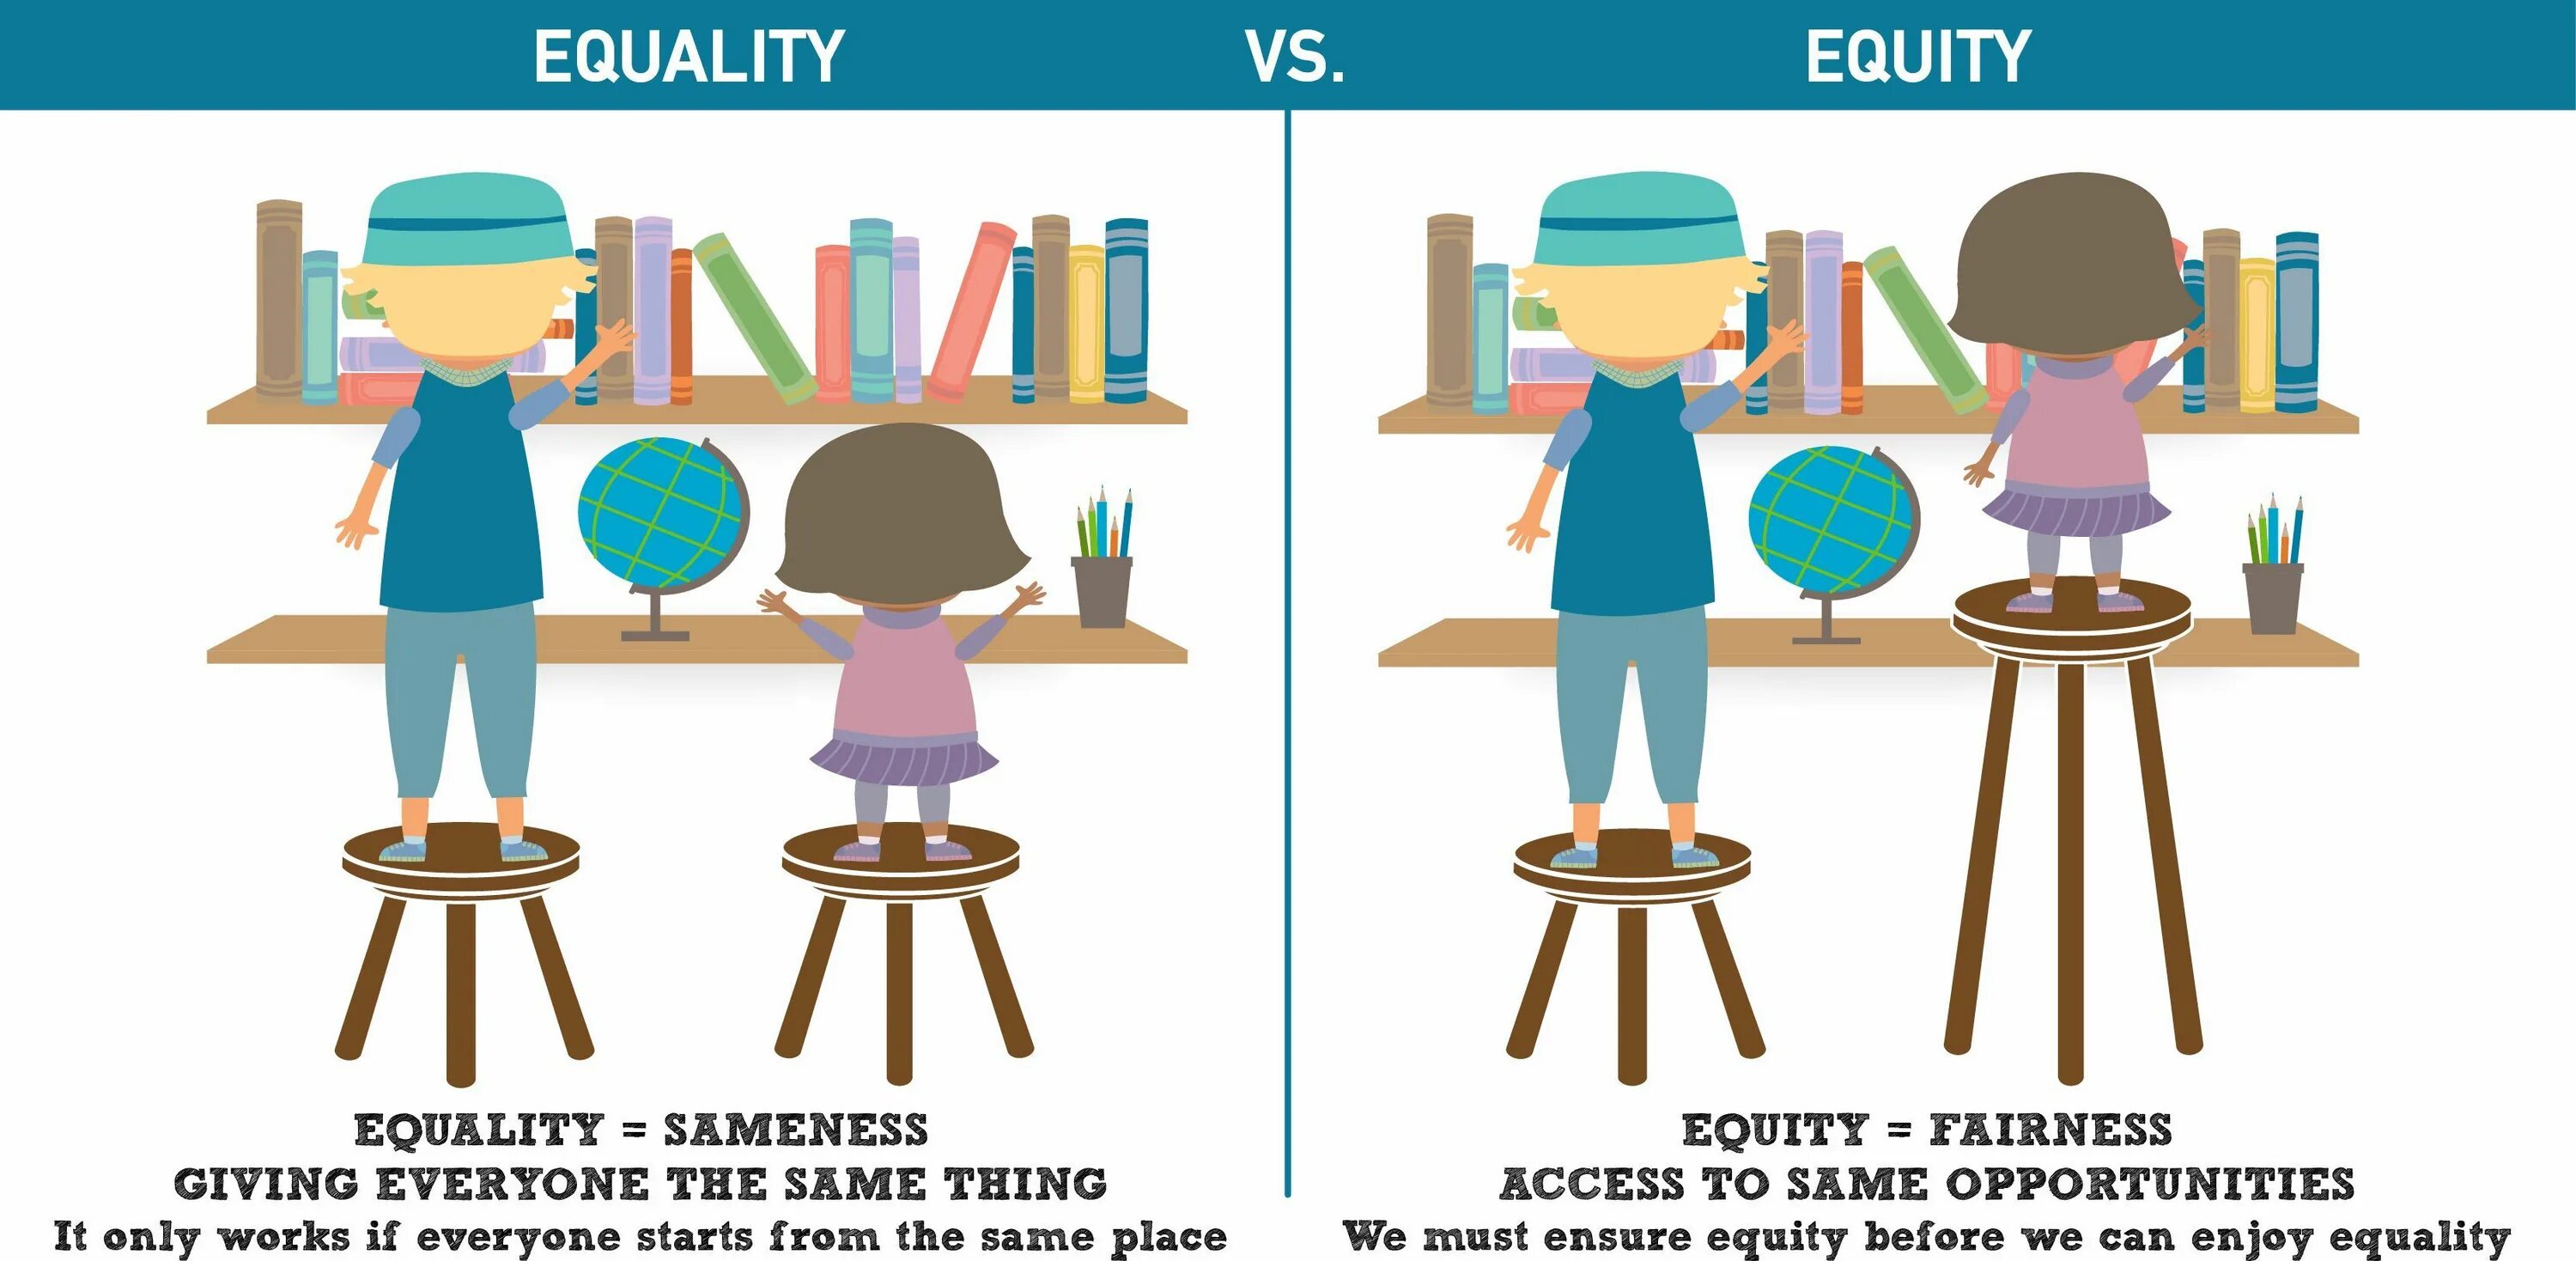 Equality Equity. Equality vs Equity. Equity equality разница. Equity equality picture. Should equal